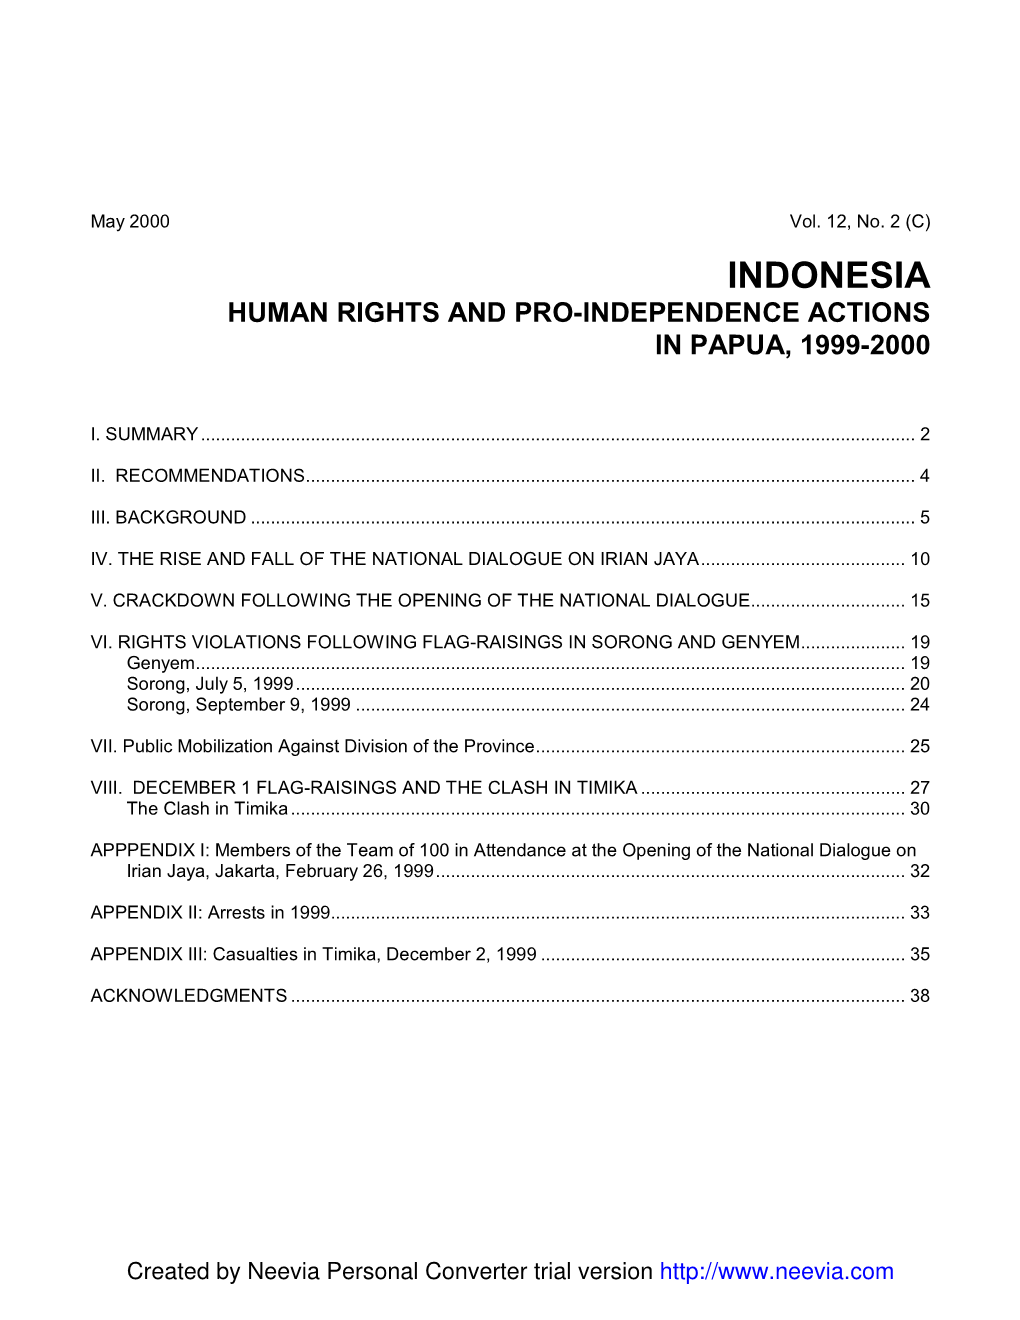 Indonesia Human Rights and Pro-Independence Actions in Papua, 1999-2000